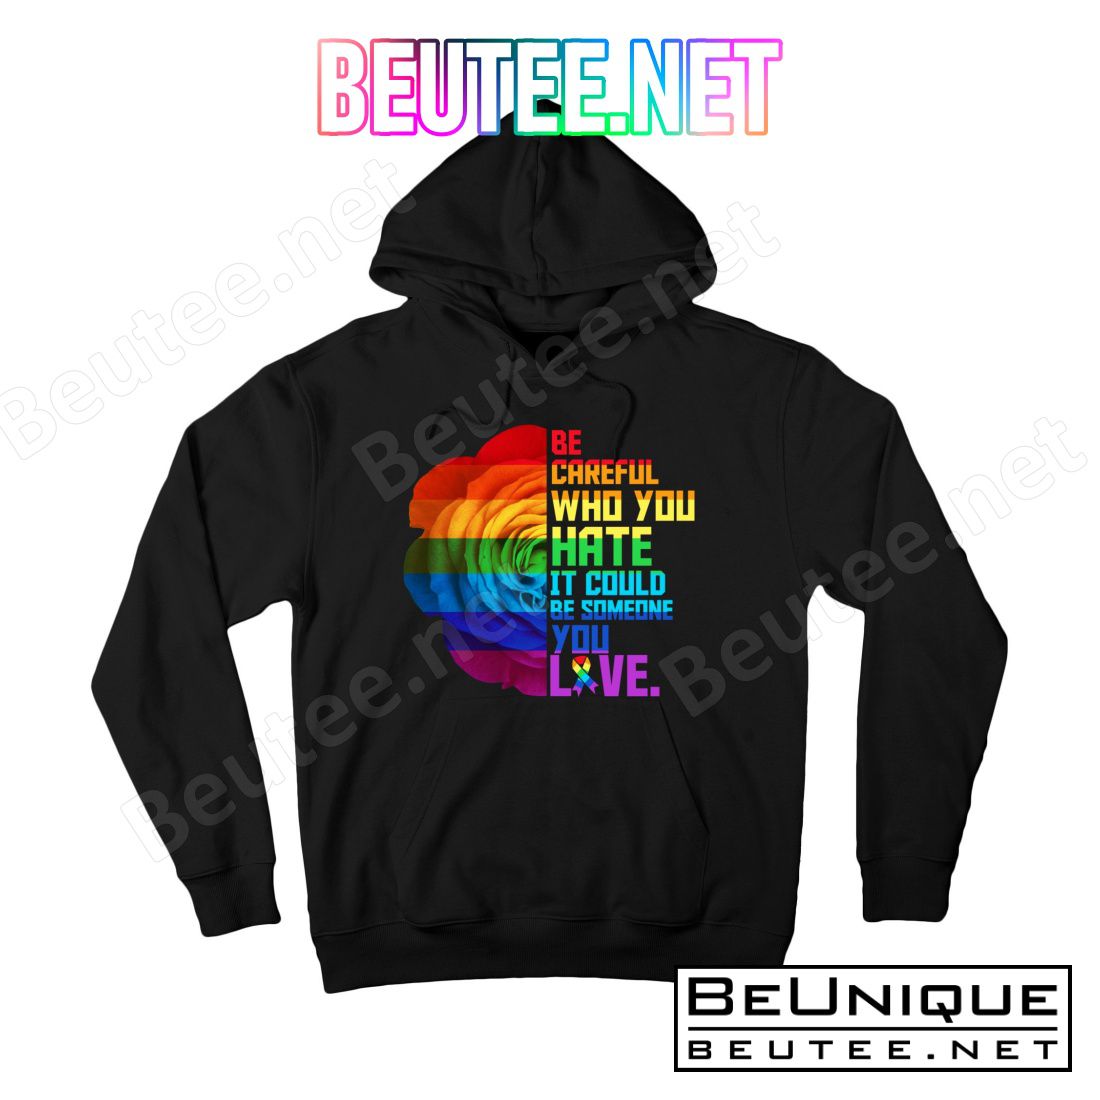 Be Careful Who You Hate Can Be Someone You Love T-Shirt